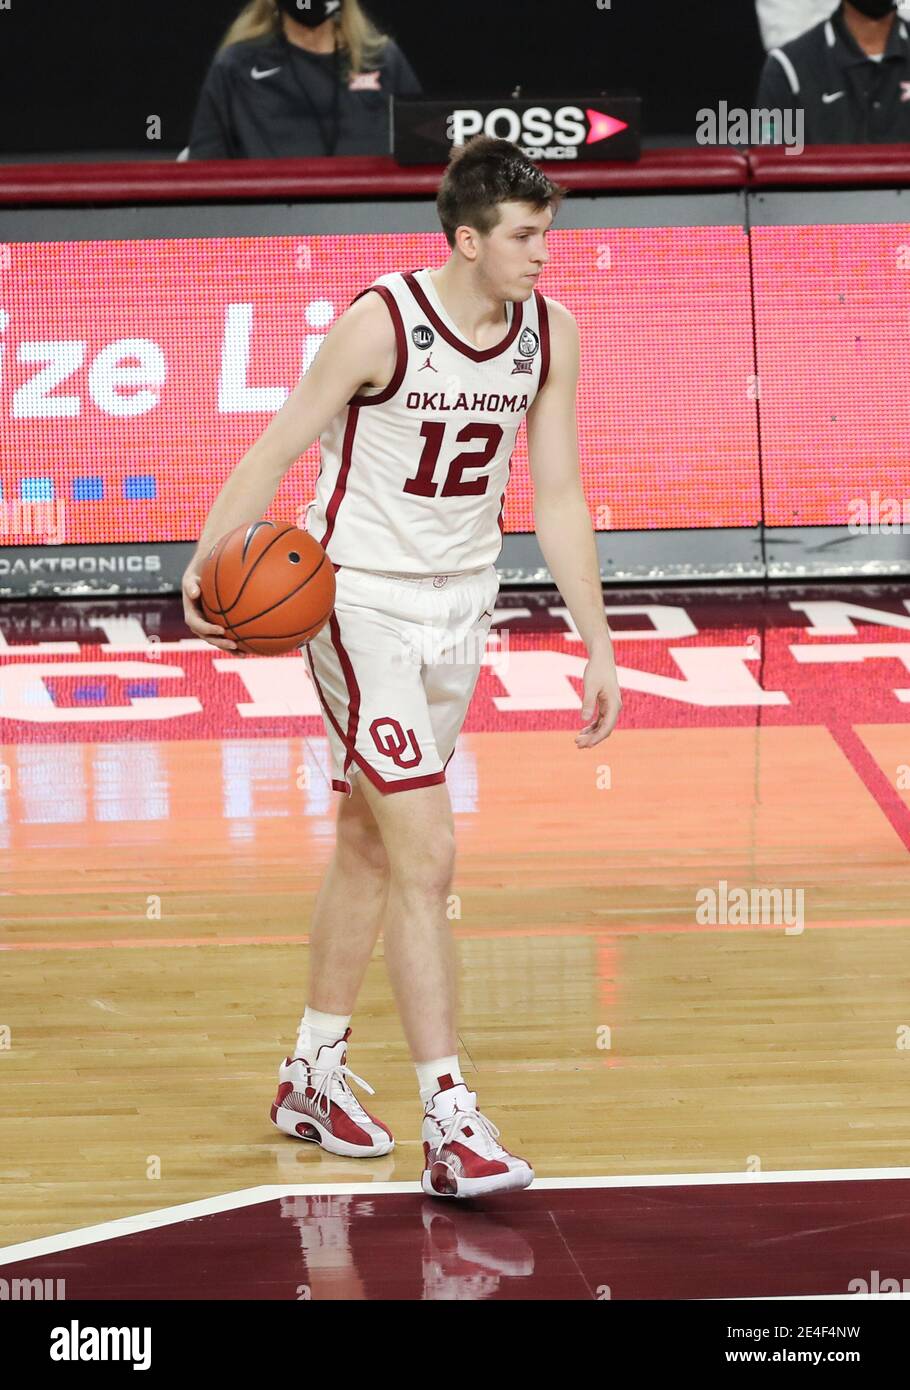 Norman, OK, USA. 23rd Jan, 2021. Oklahoma Sooners guard Austin Reaves (12) dribbles the ball up the court during a basketball game between the Kansas Jayhawks and Oklahoma Sooners at Lloyd Noble Center in Norman, OK. Gray Siegel/CSM/Alamy Live News Stock Photo